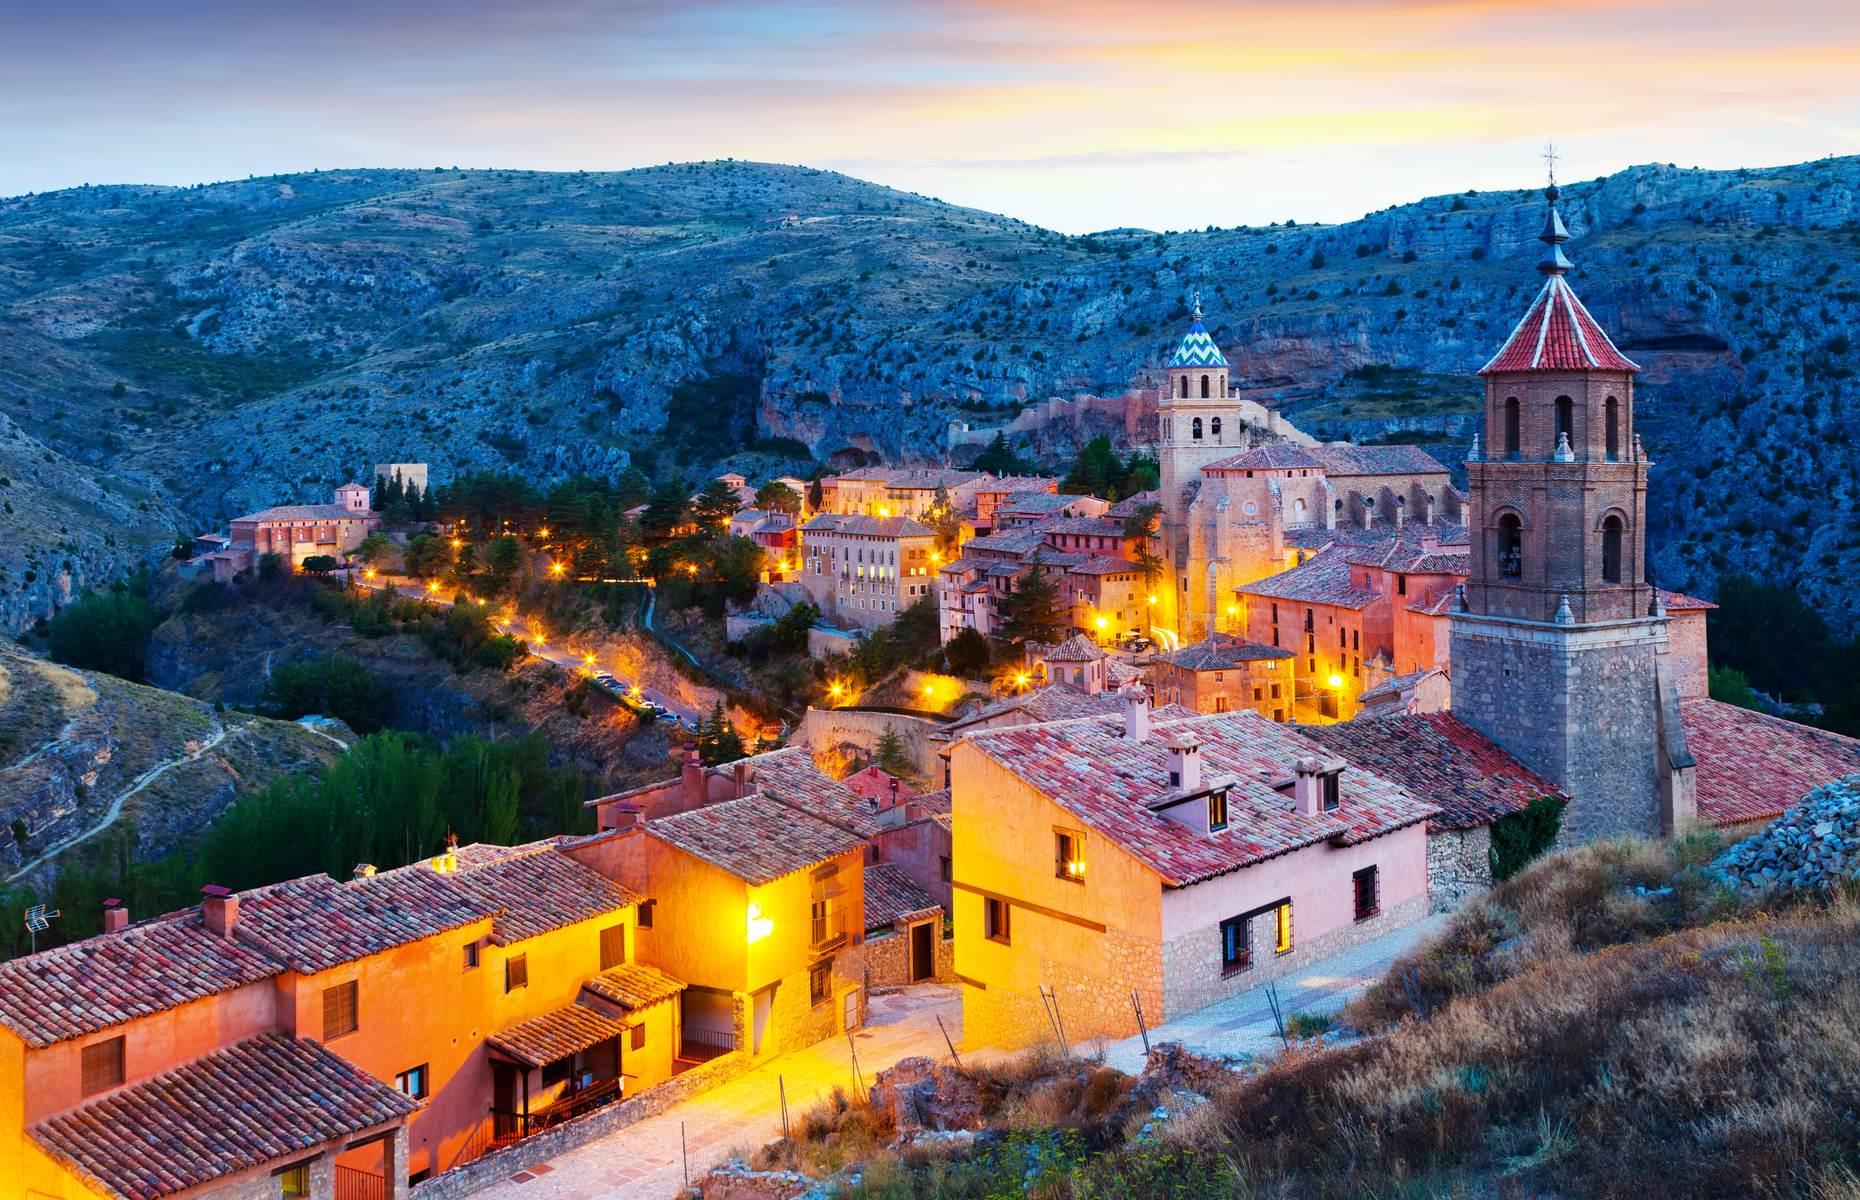 Medieval Albarracín is made up of a trickle of rosy-toned houses that look almost as if they’ve been poured onto the hilltop. Located in eastern-central Spain, the town’s walls and first fortress were built between the 10th and 13th centuries, while much of the Old Town, including the Cathedral of San Salvador, dates back to the 16th century. The buildings’ unique color comes from gypsum, the local material used to construct them.